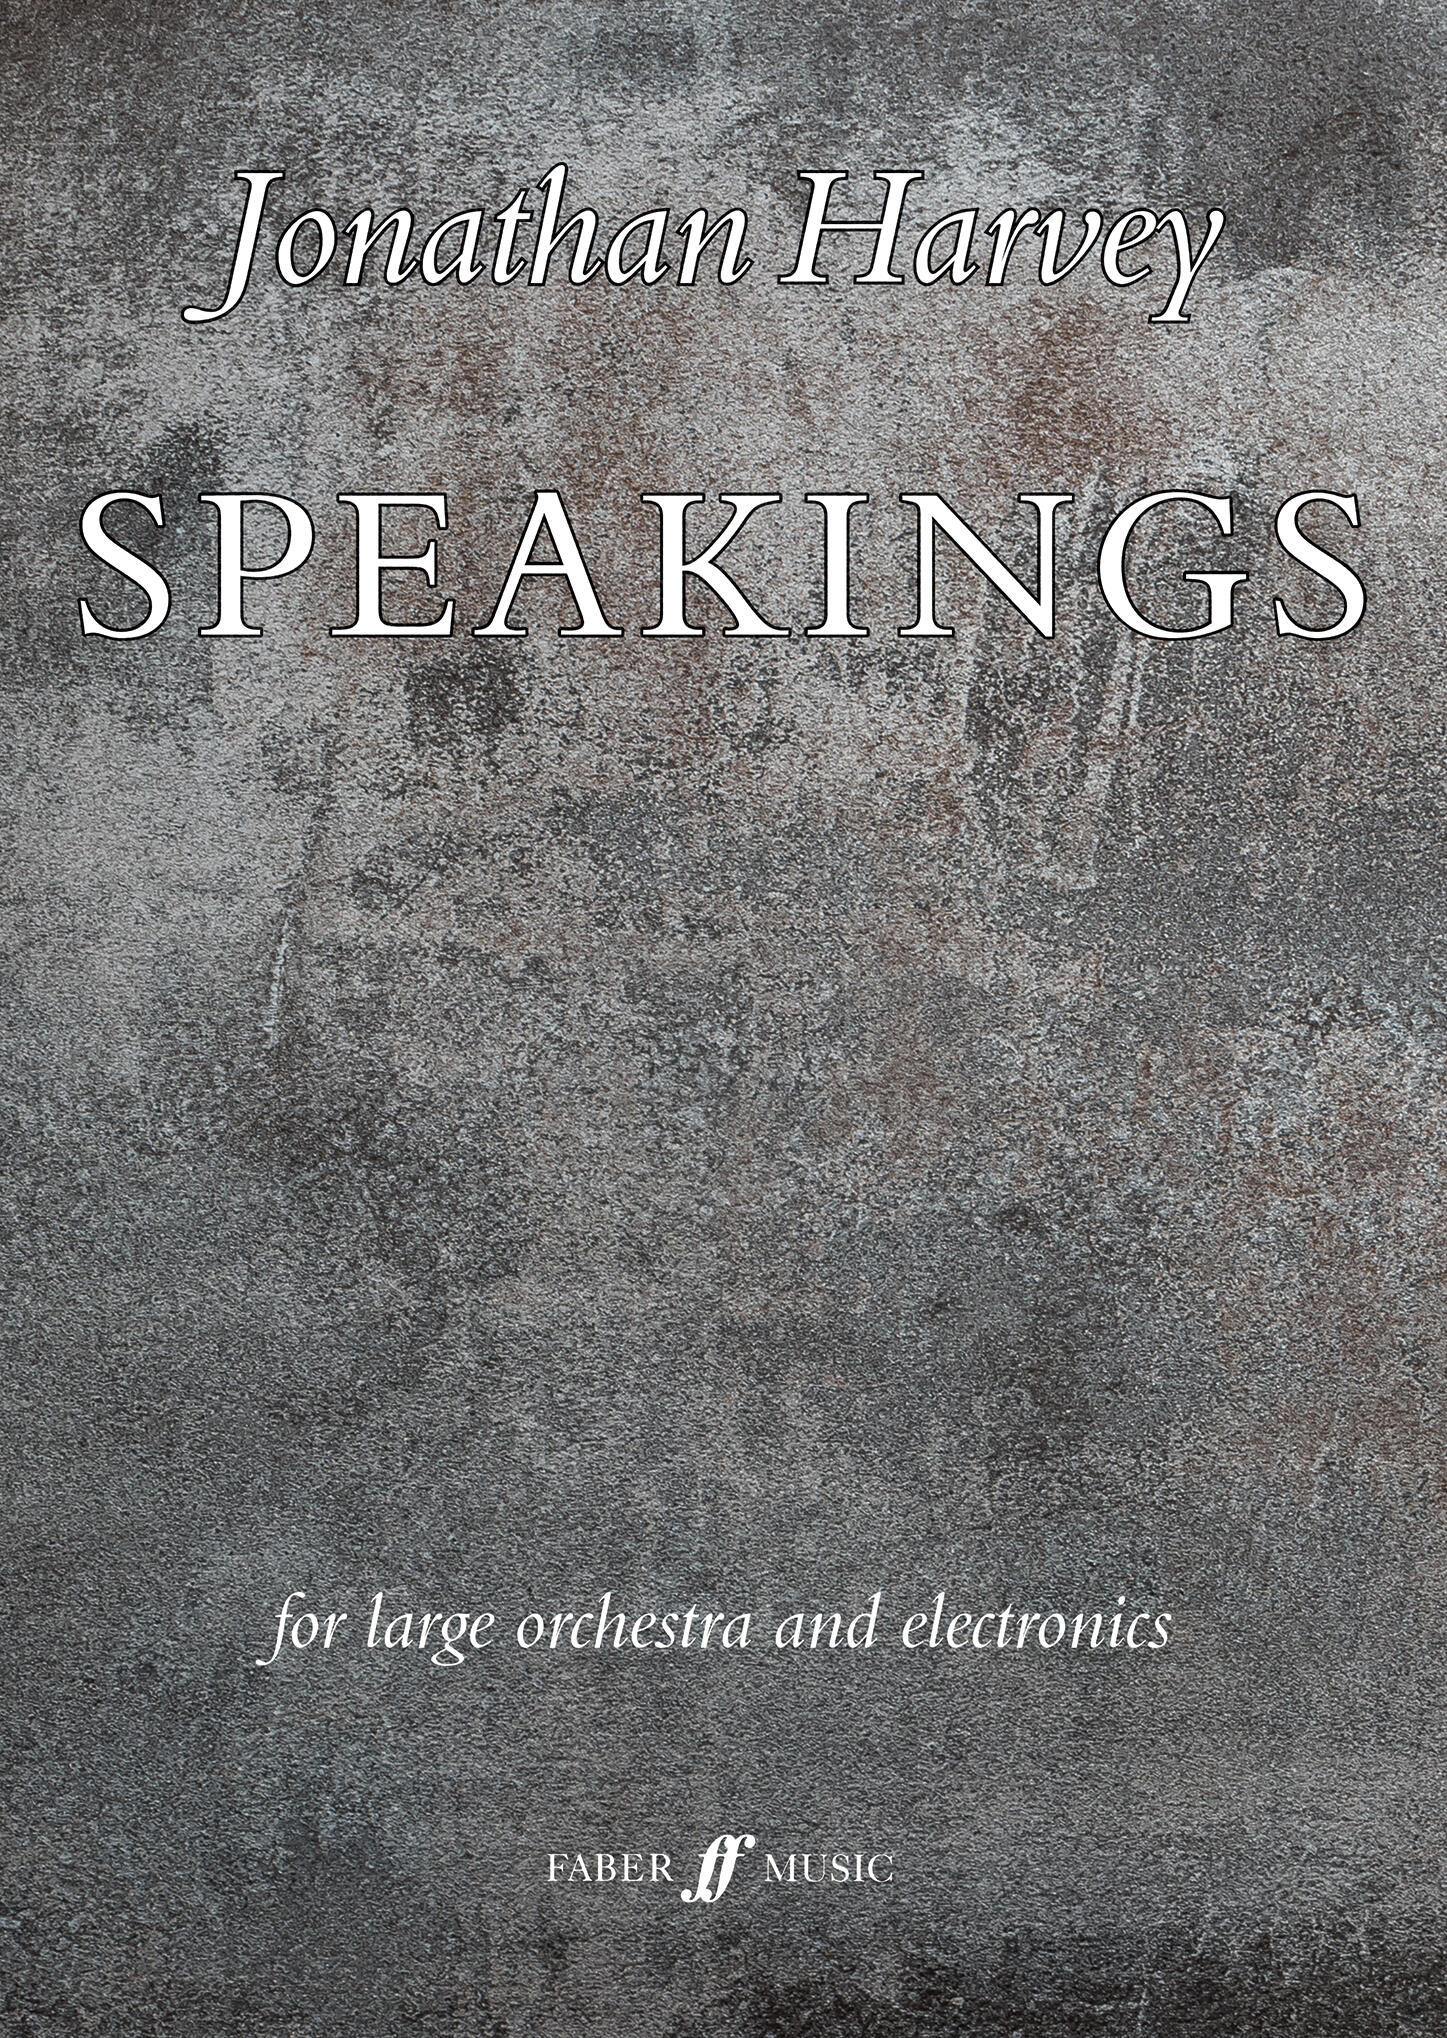 Speakings for large orchestra and electronics Jonathan Harvey  Orchestra Partitur  571538886 : photo 1